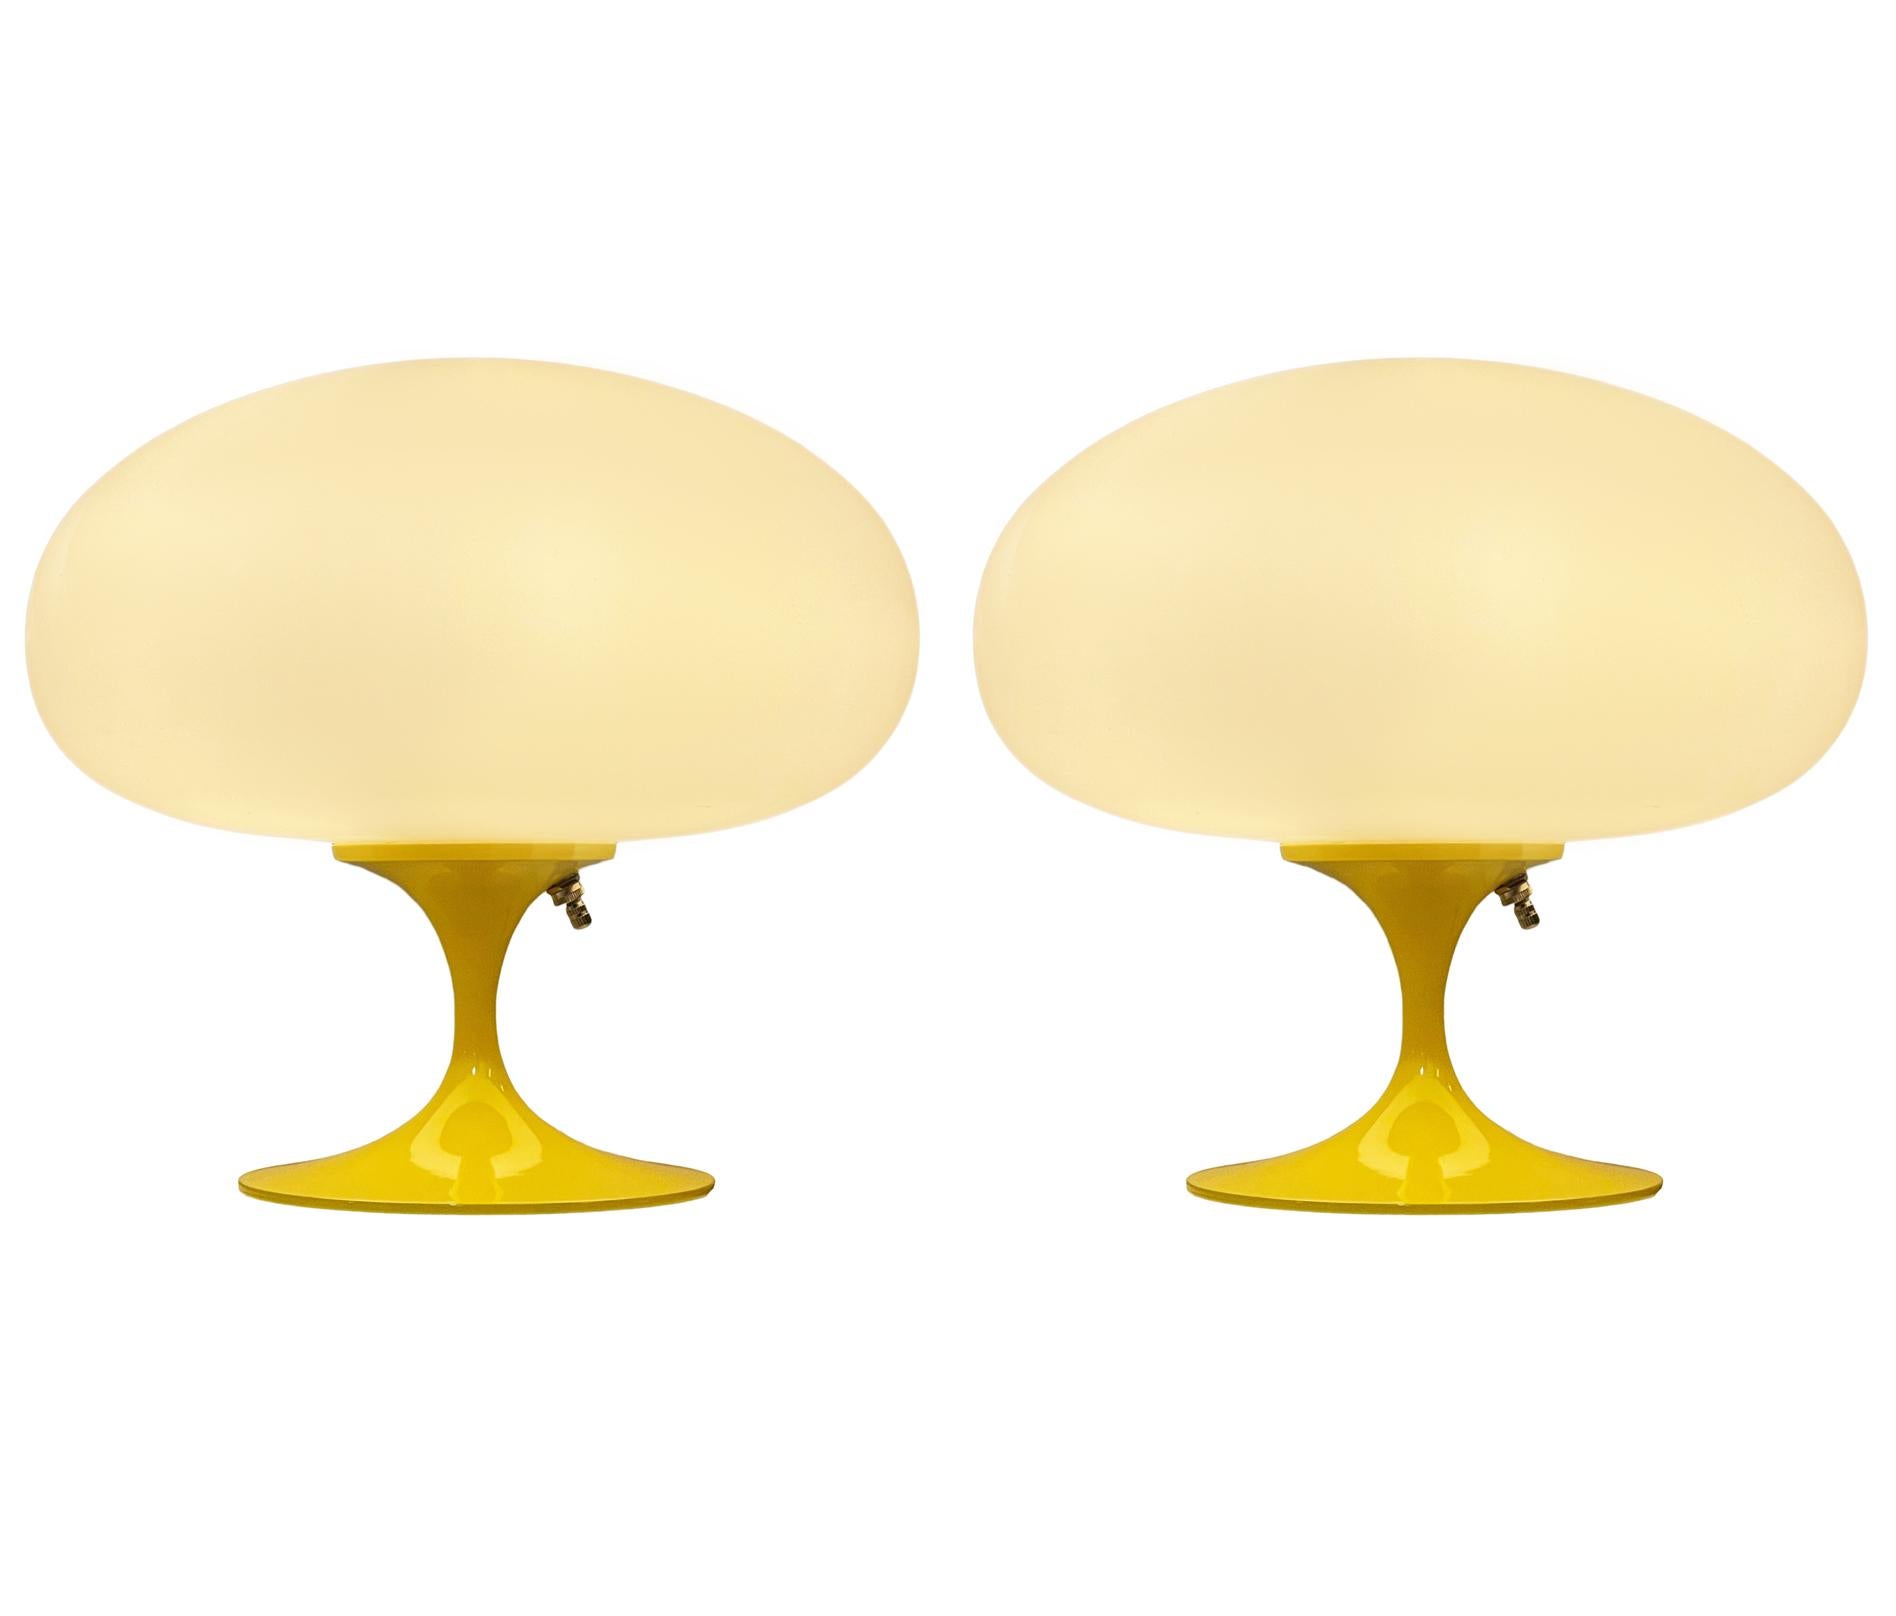 A gorgeous matching pair of tulip form table lamps after the Laurel Lamp company. These feature yellow powder coated cast aluminum bases with mouth blown frosted white glass shades. The price includes the pair as shown.